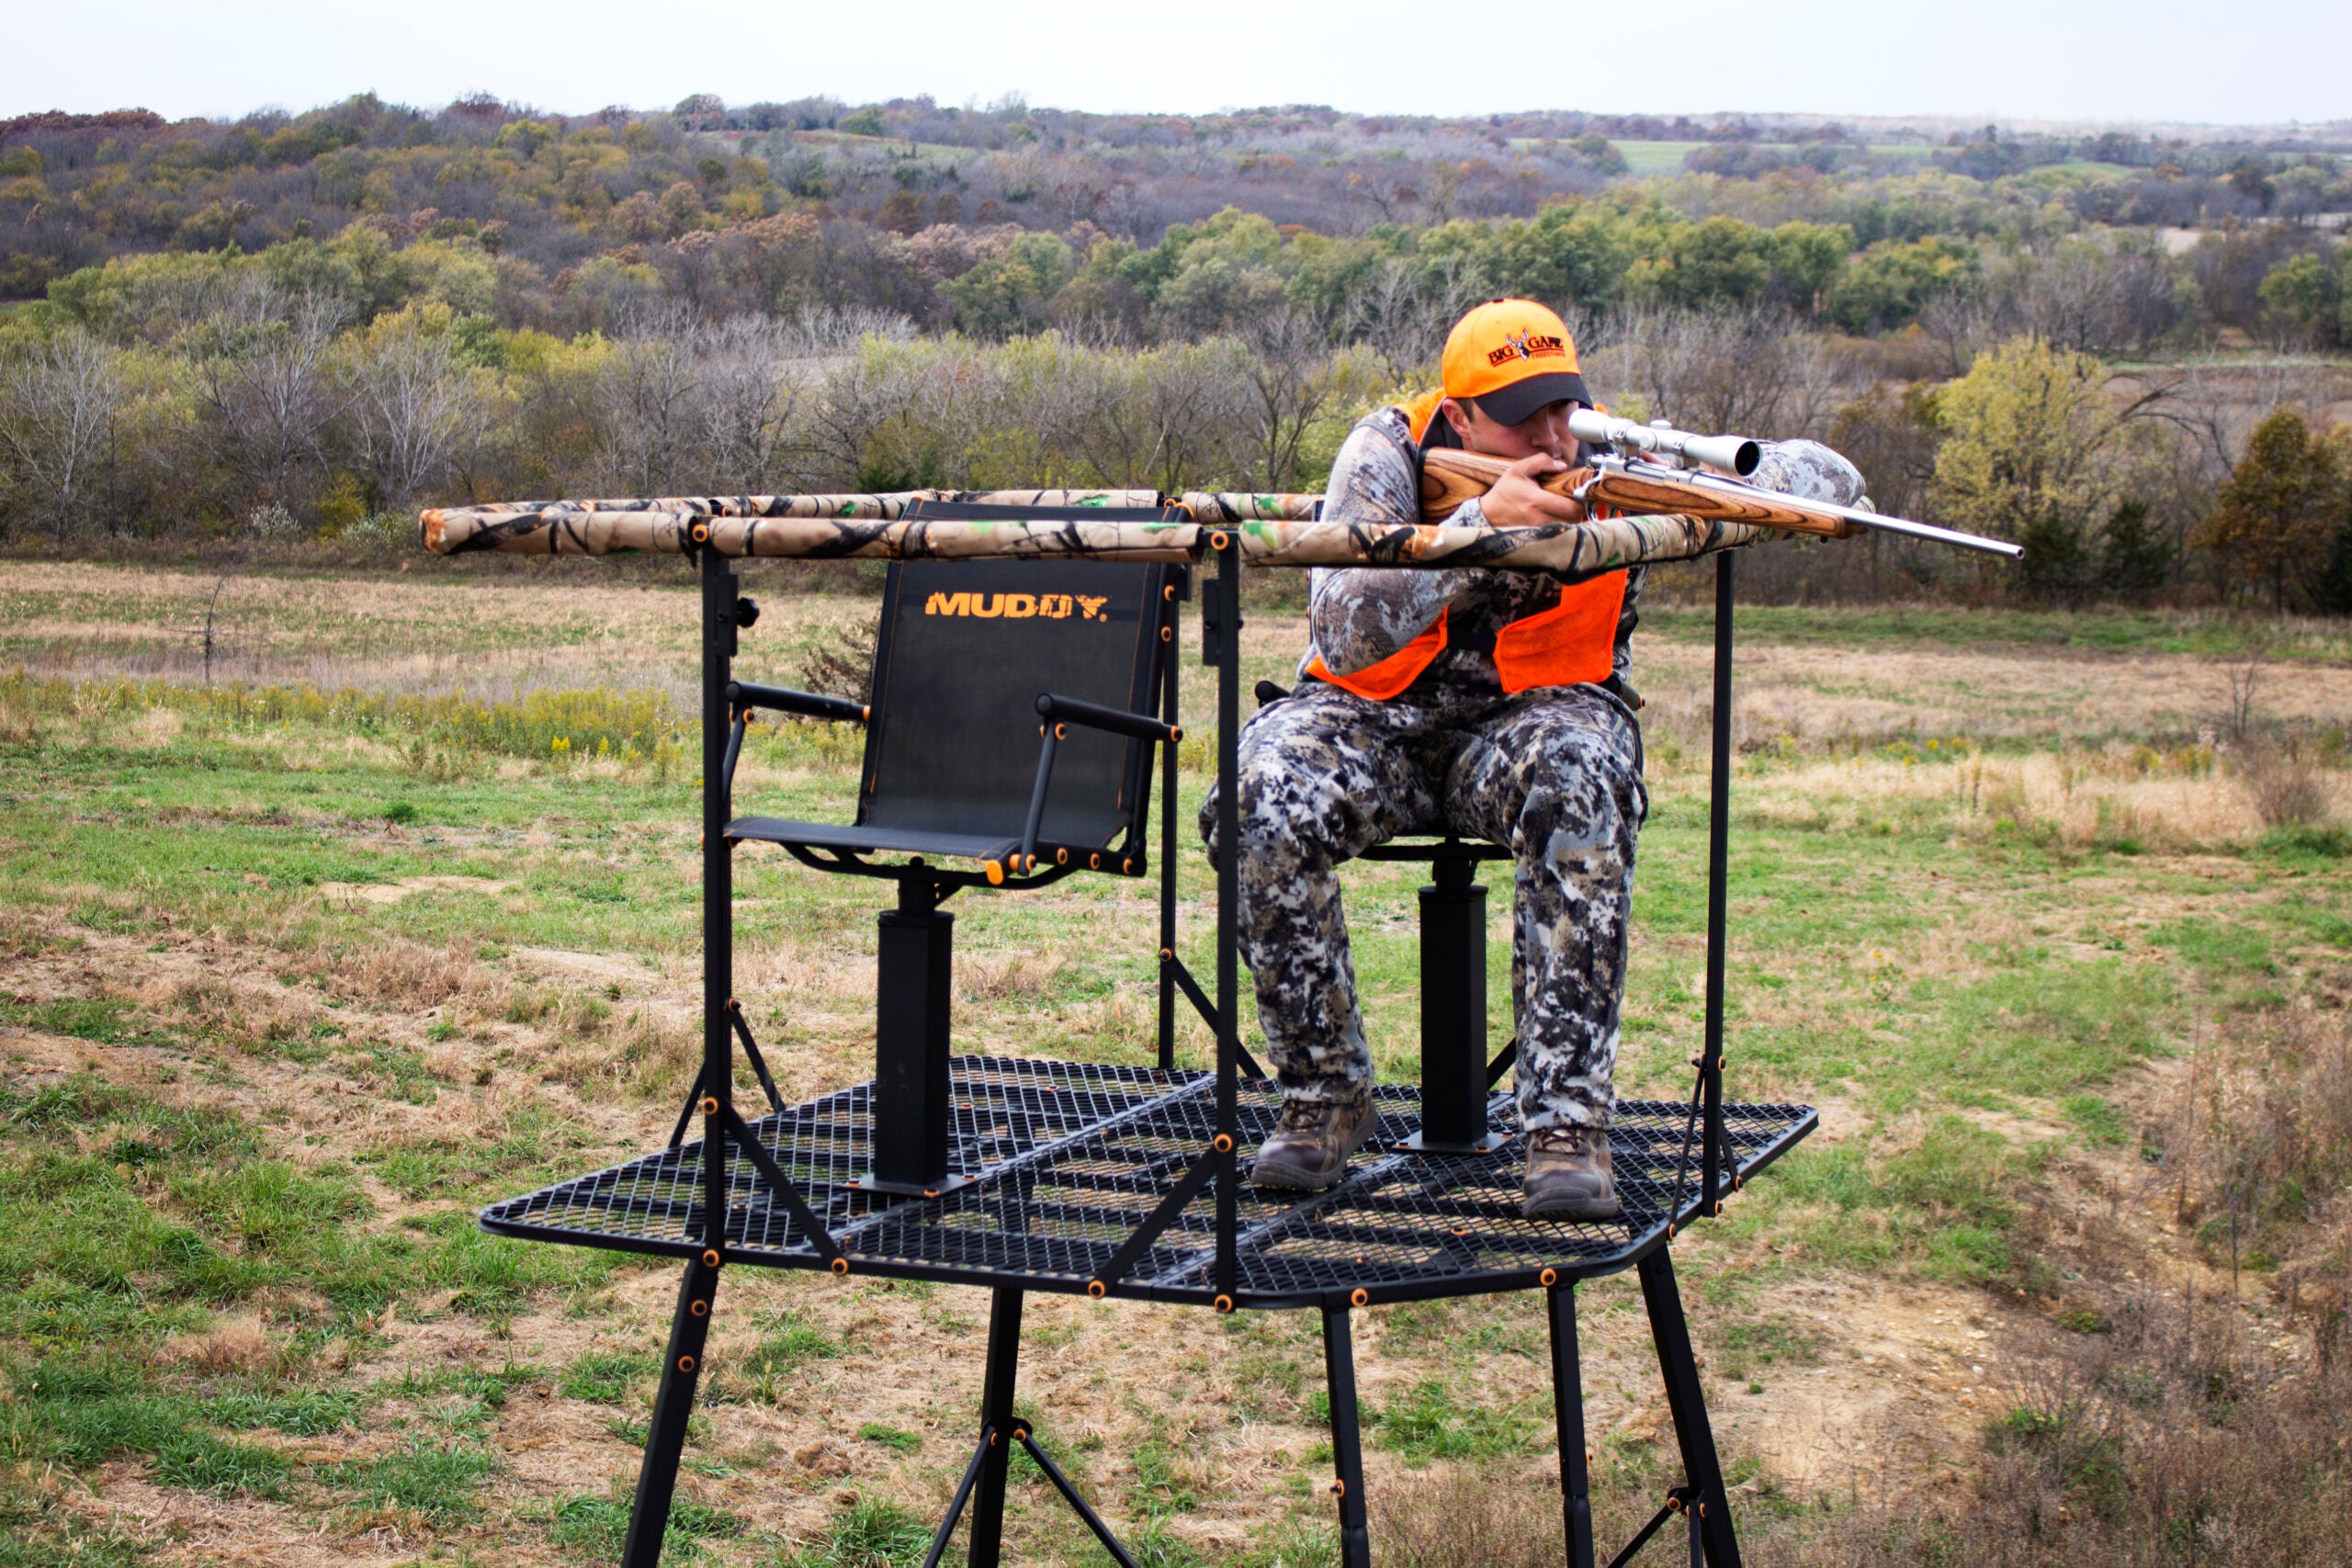 Ultra Comfort Deluxe Hang-On Stand - Outdoor Hunting Gear Made